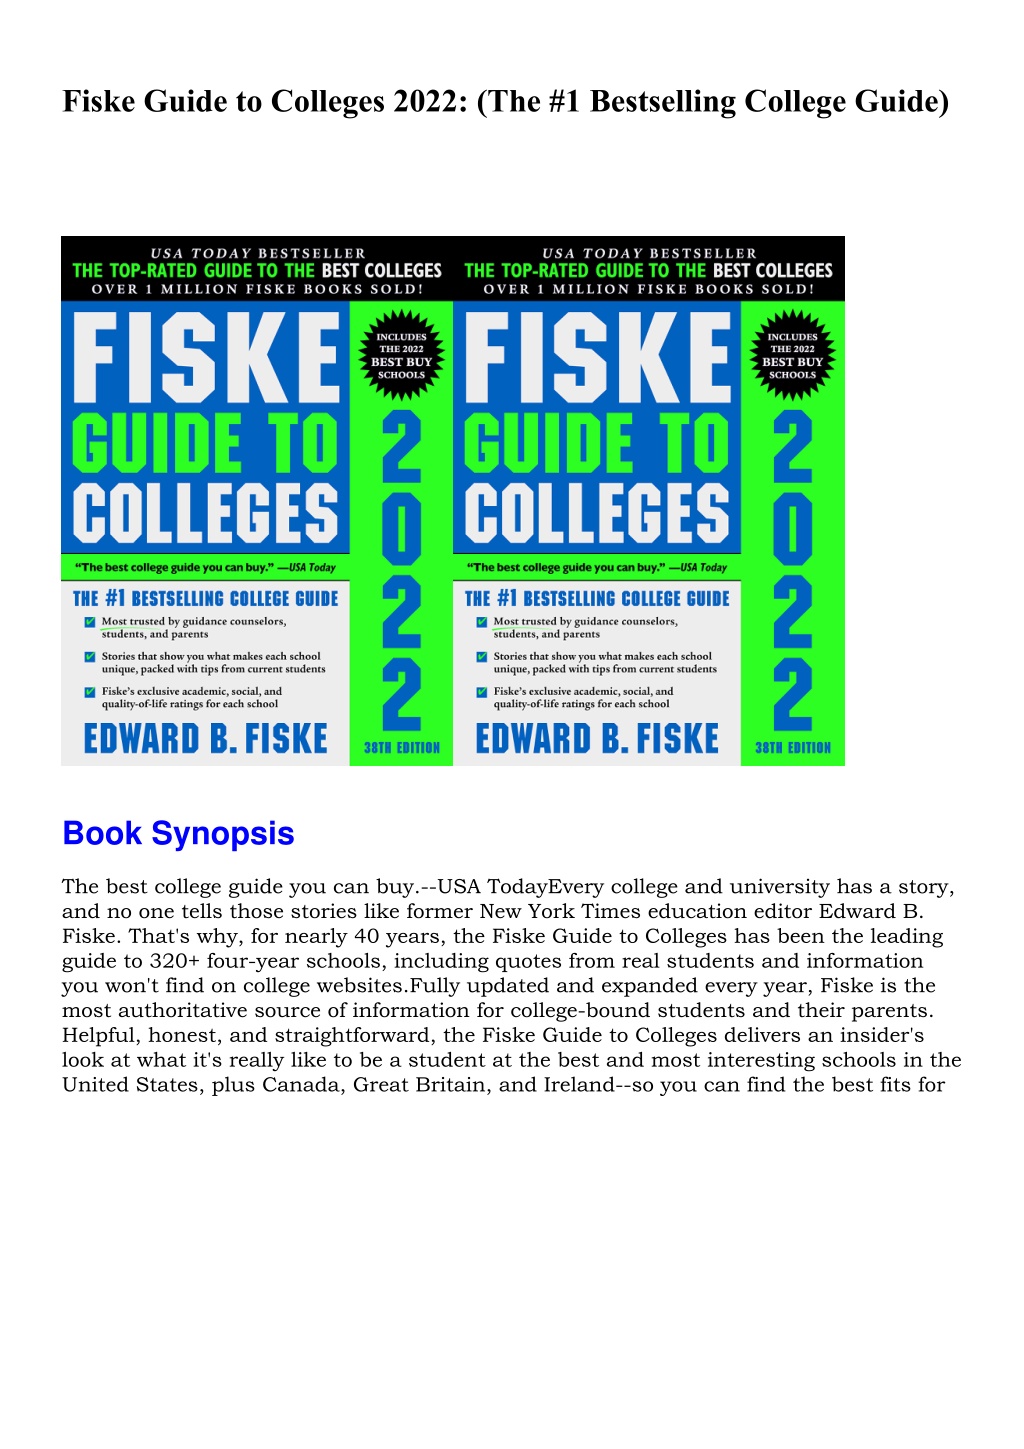 PPT EBOOK Fiske Guide to Colleges 2022 The 1 Bestselling College